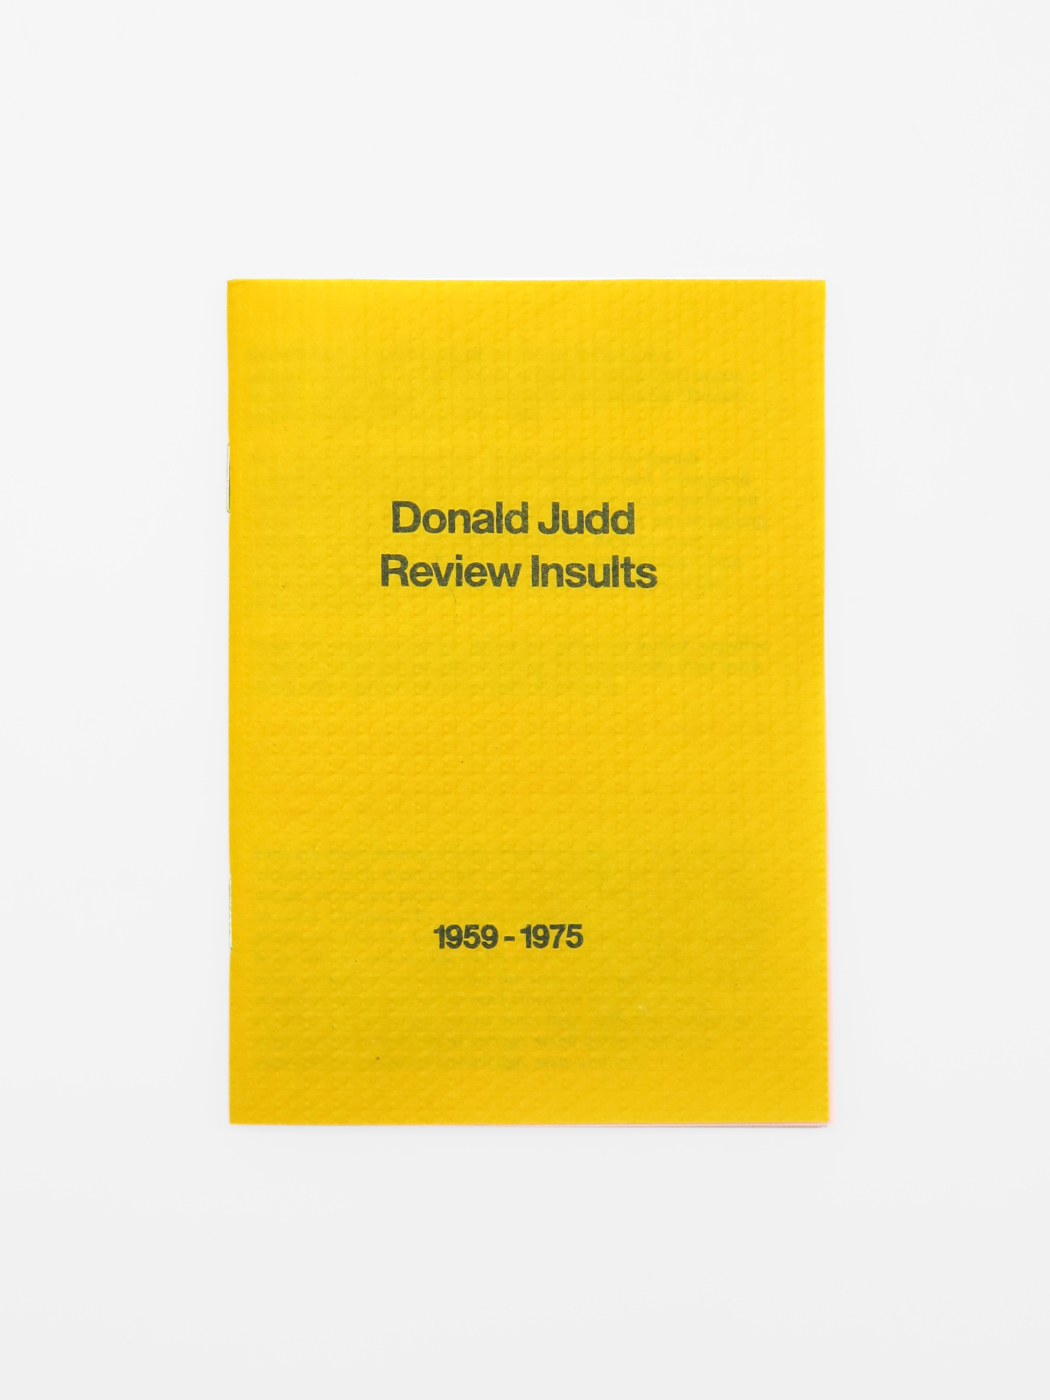 Donald Judd, Review Insults